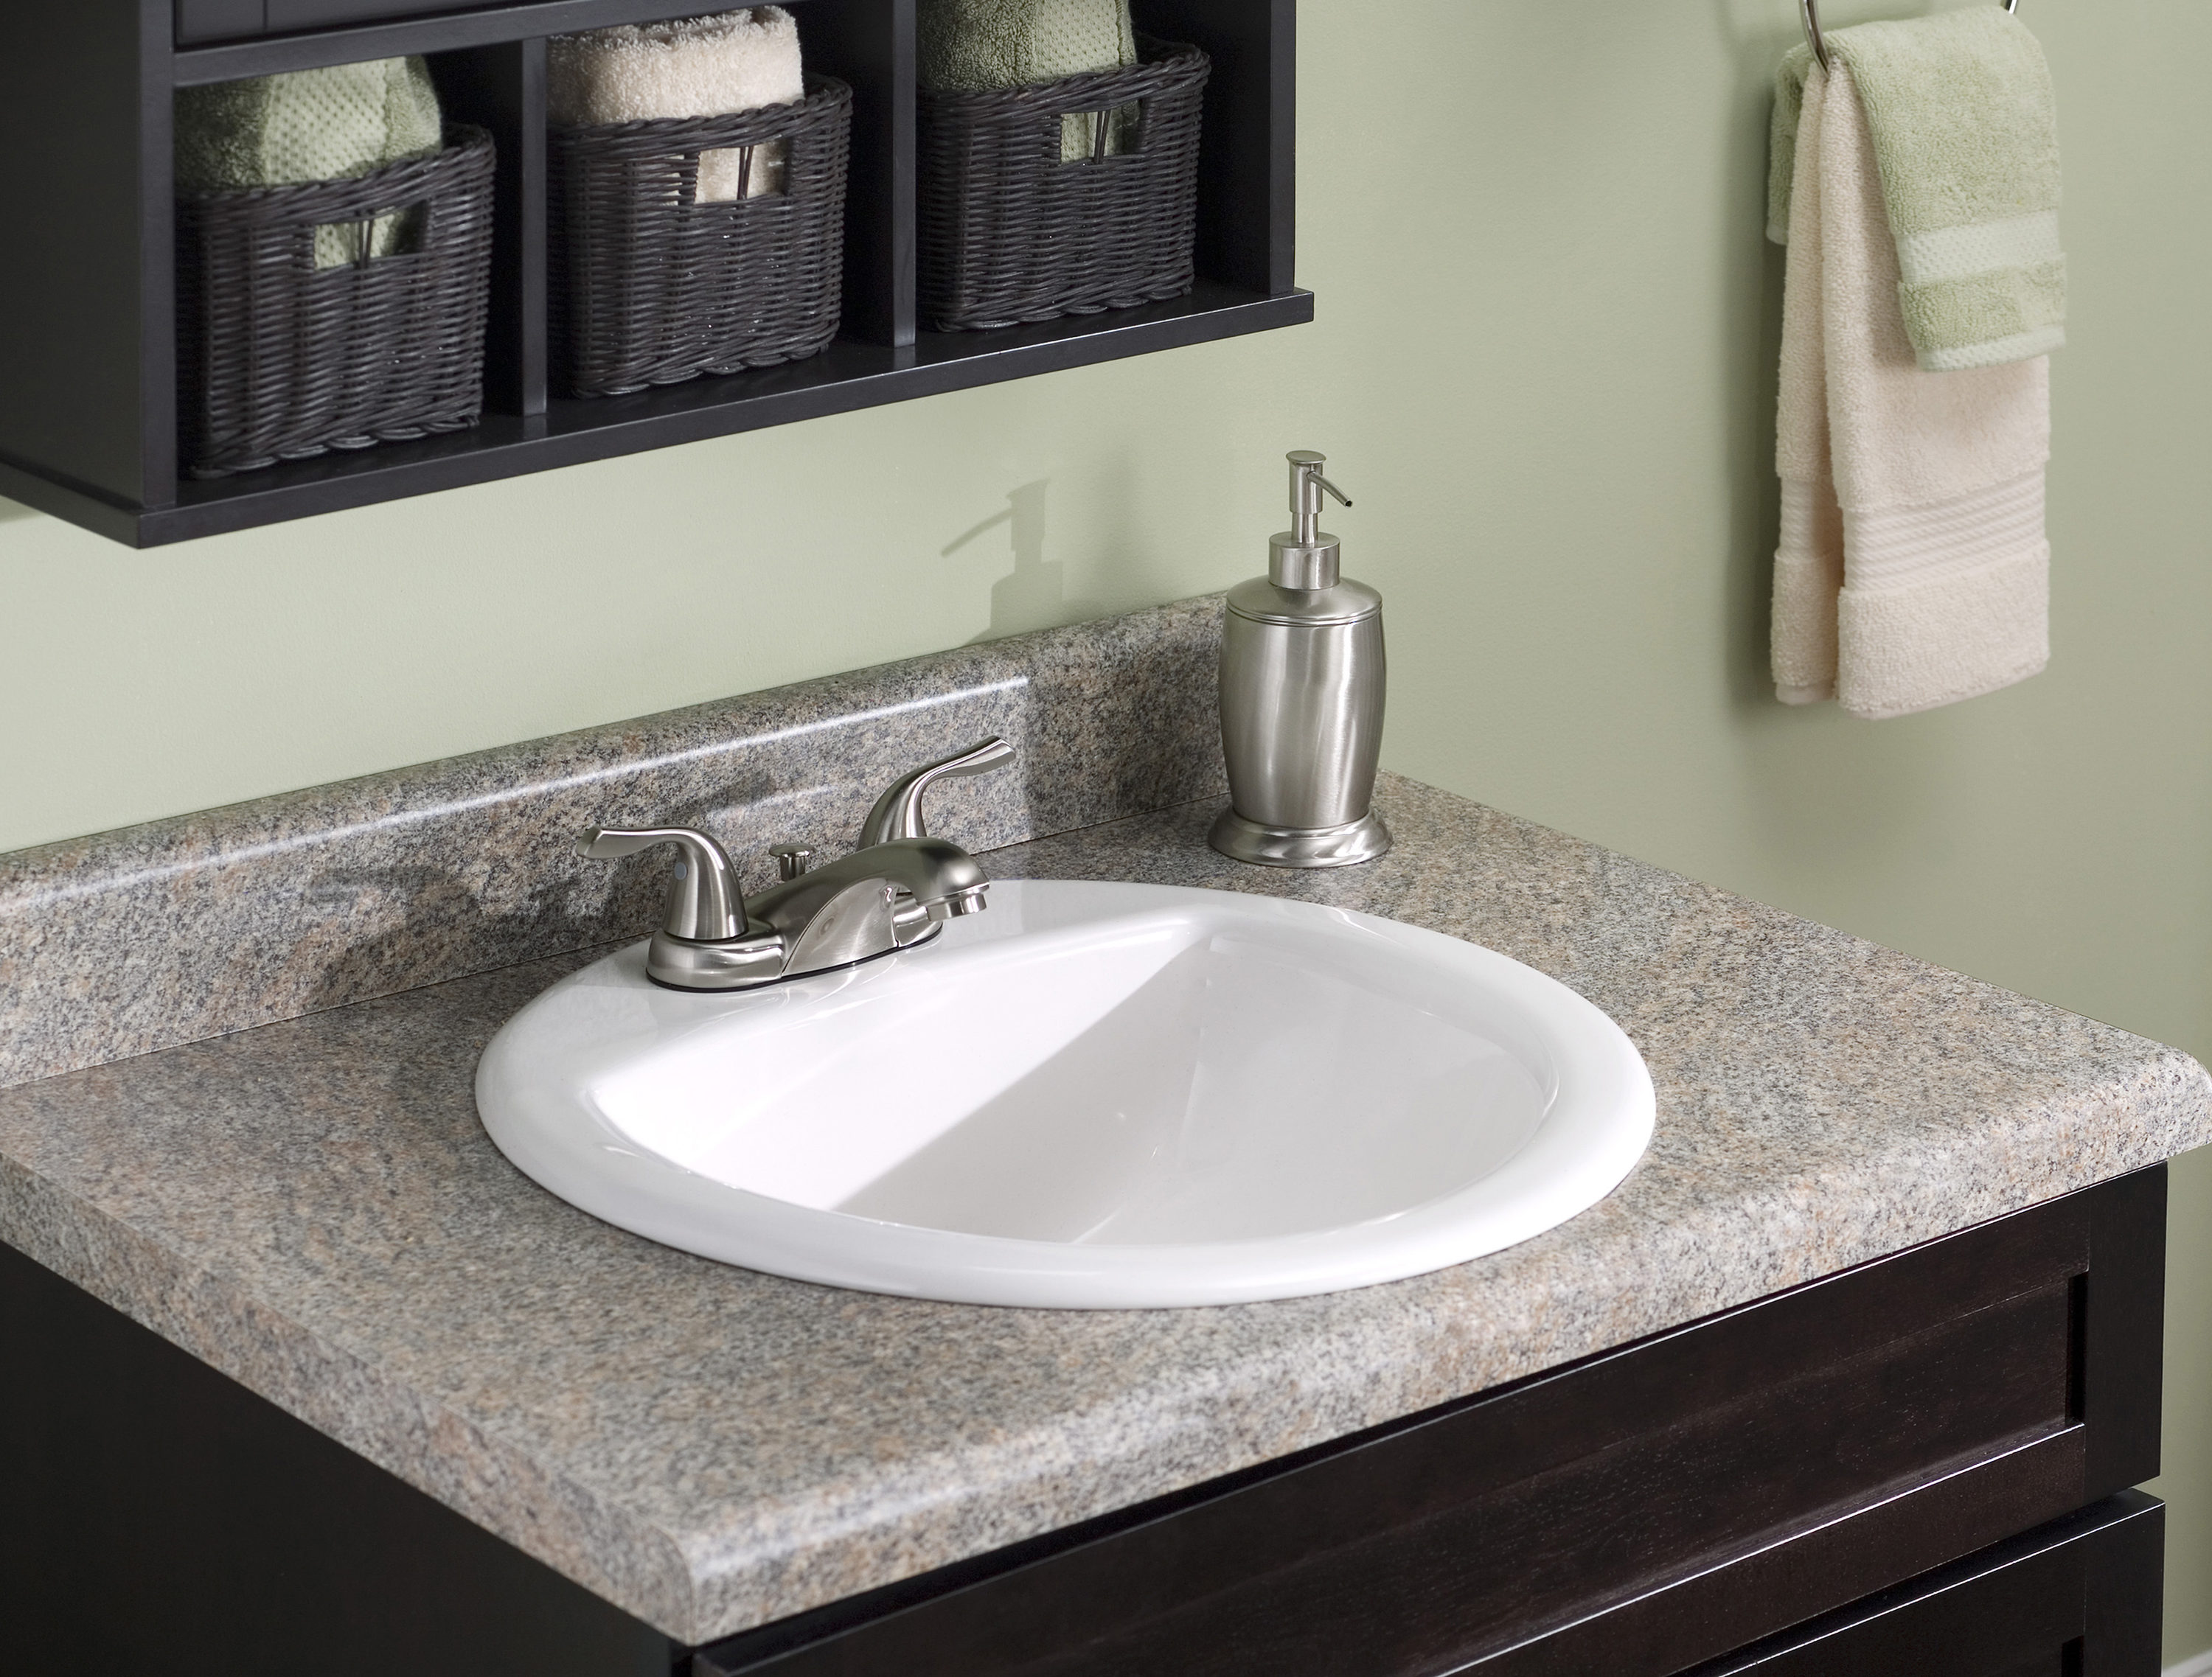 Aquasource White Drop In Oval Bathroom Sink With Overflow In The